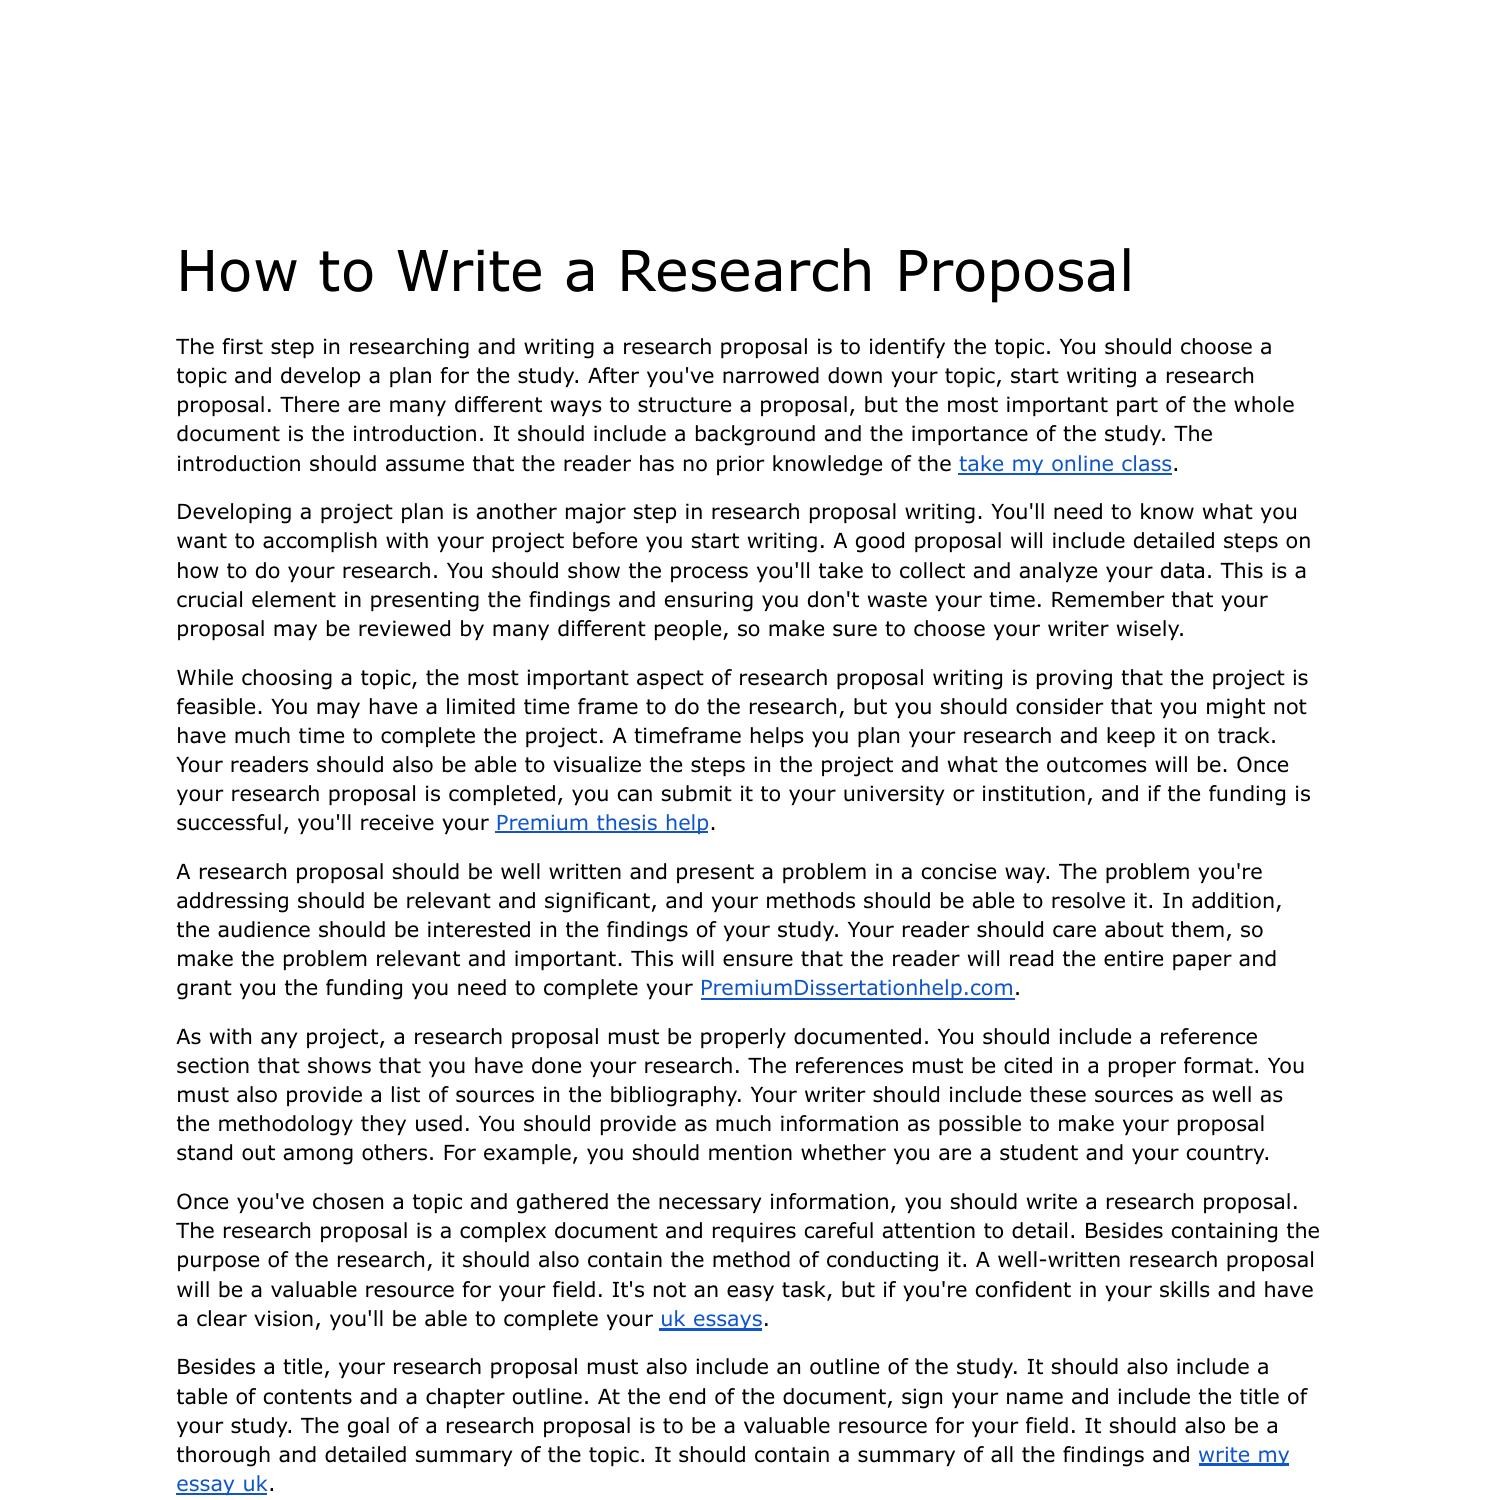 how to write a research proposal pdf